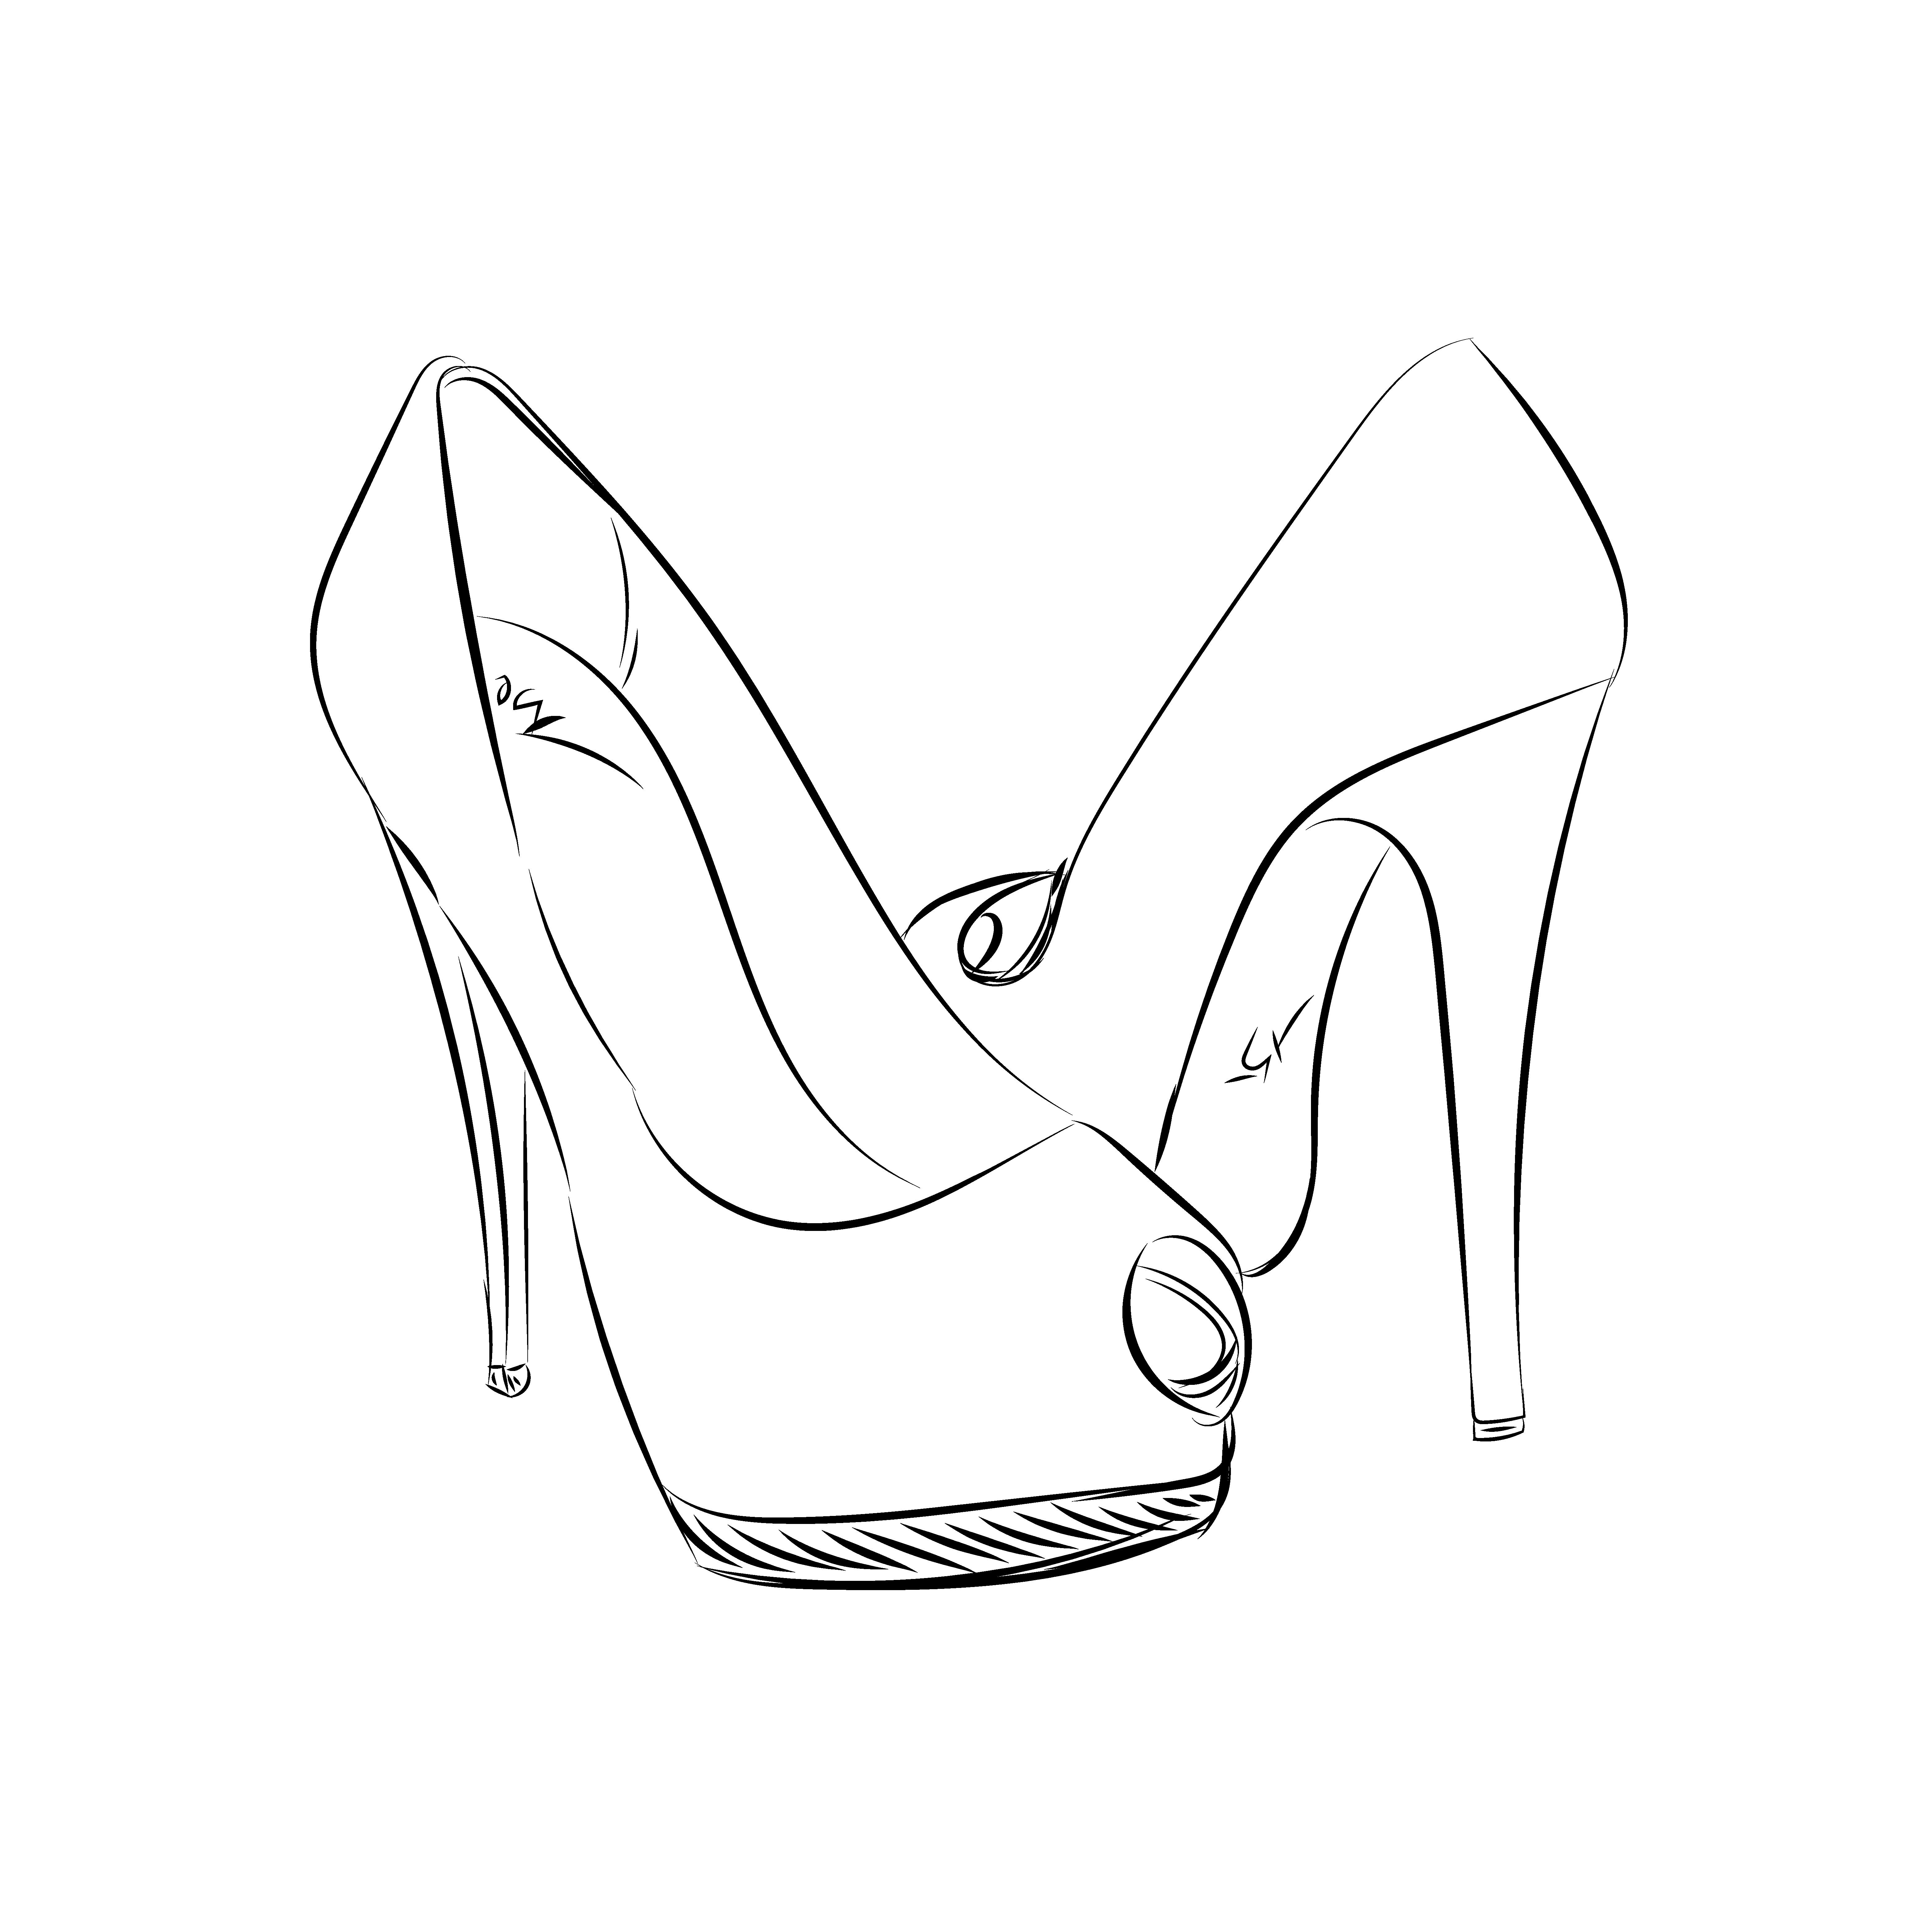 how to sketch high heels high heel shoes the modellista wrapping things up and how to high sketch heels 